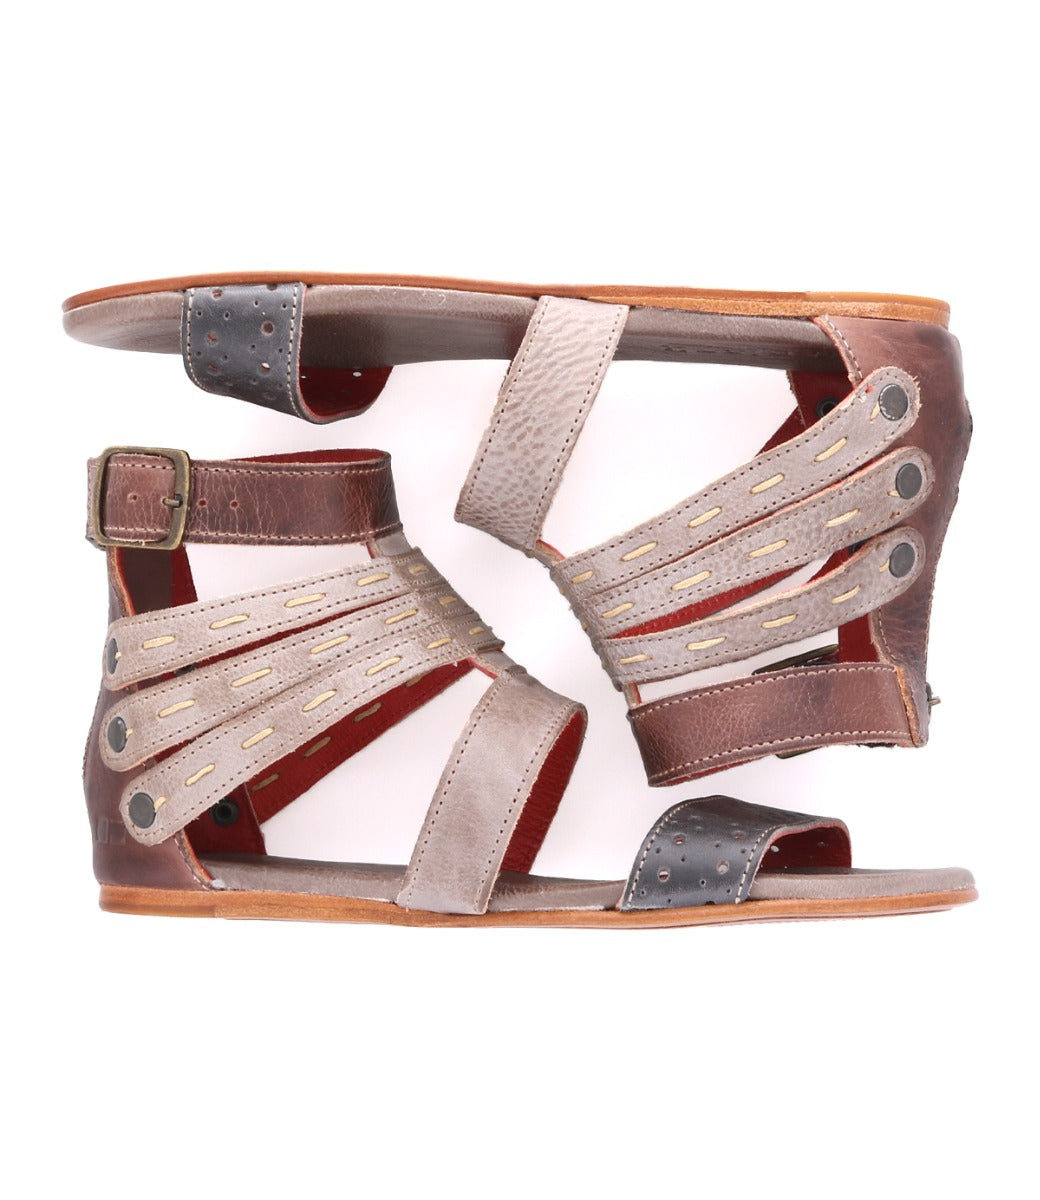 A pair of Bed Stu Artemis women's sandals with straps and buckles.